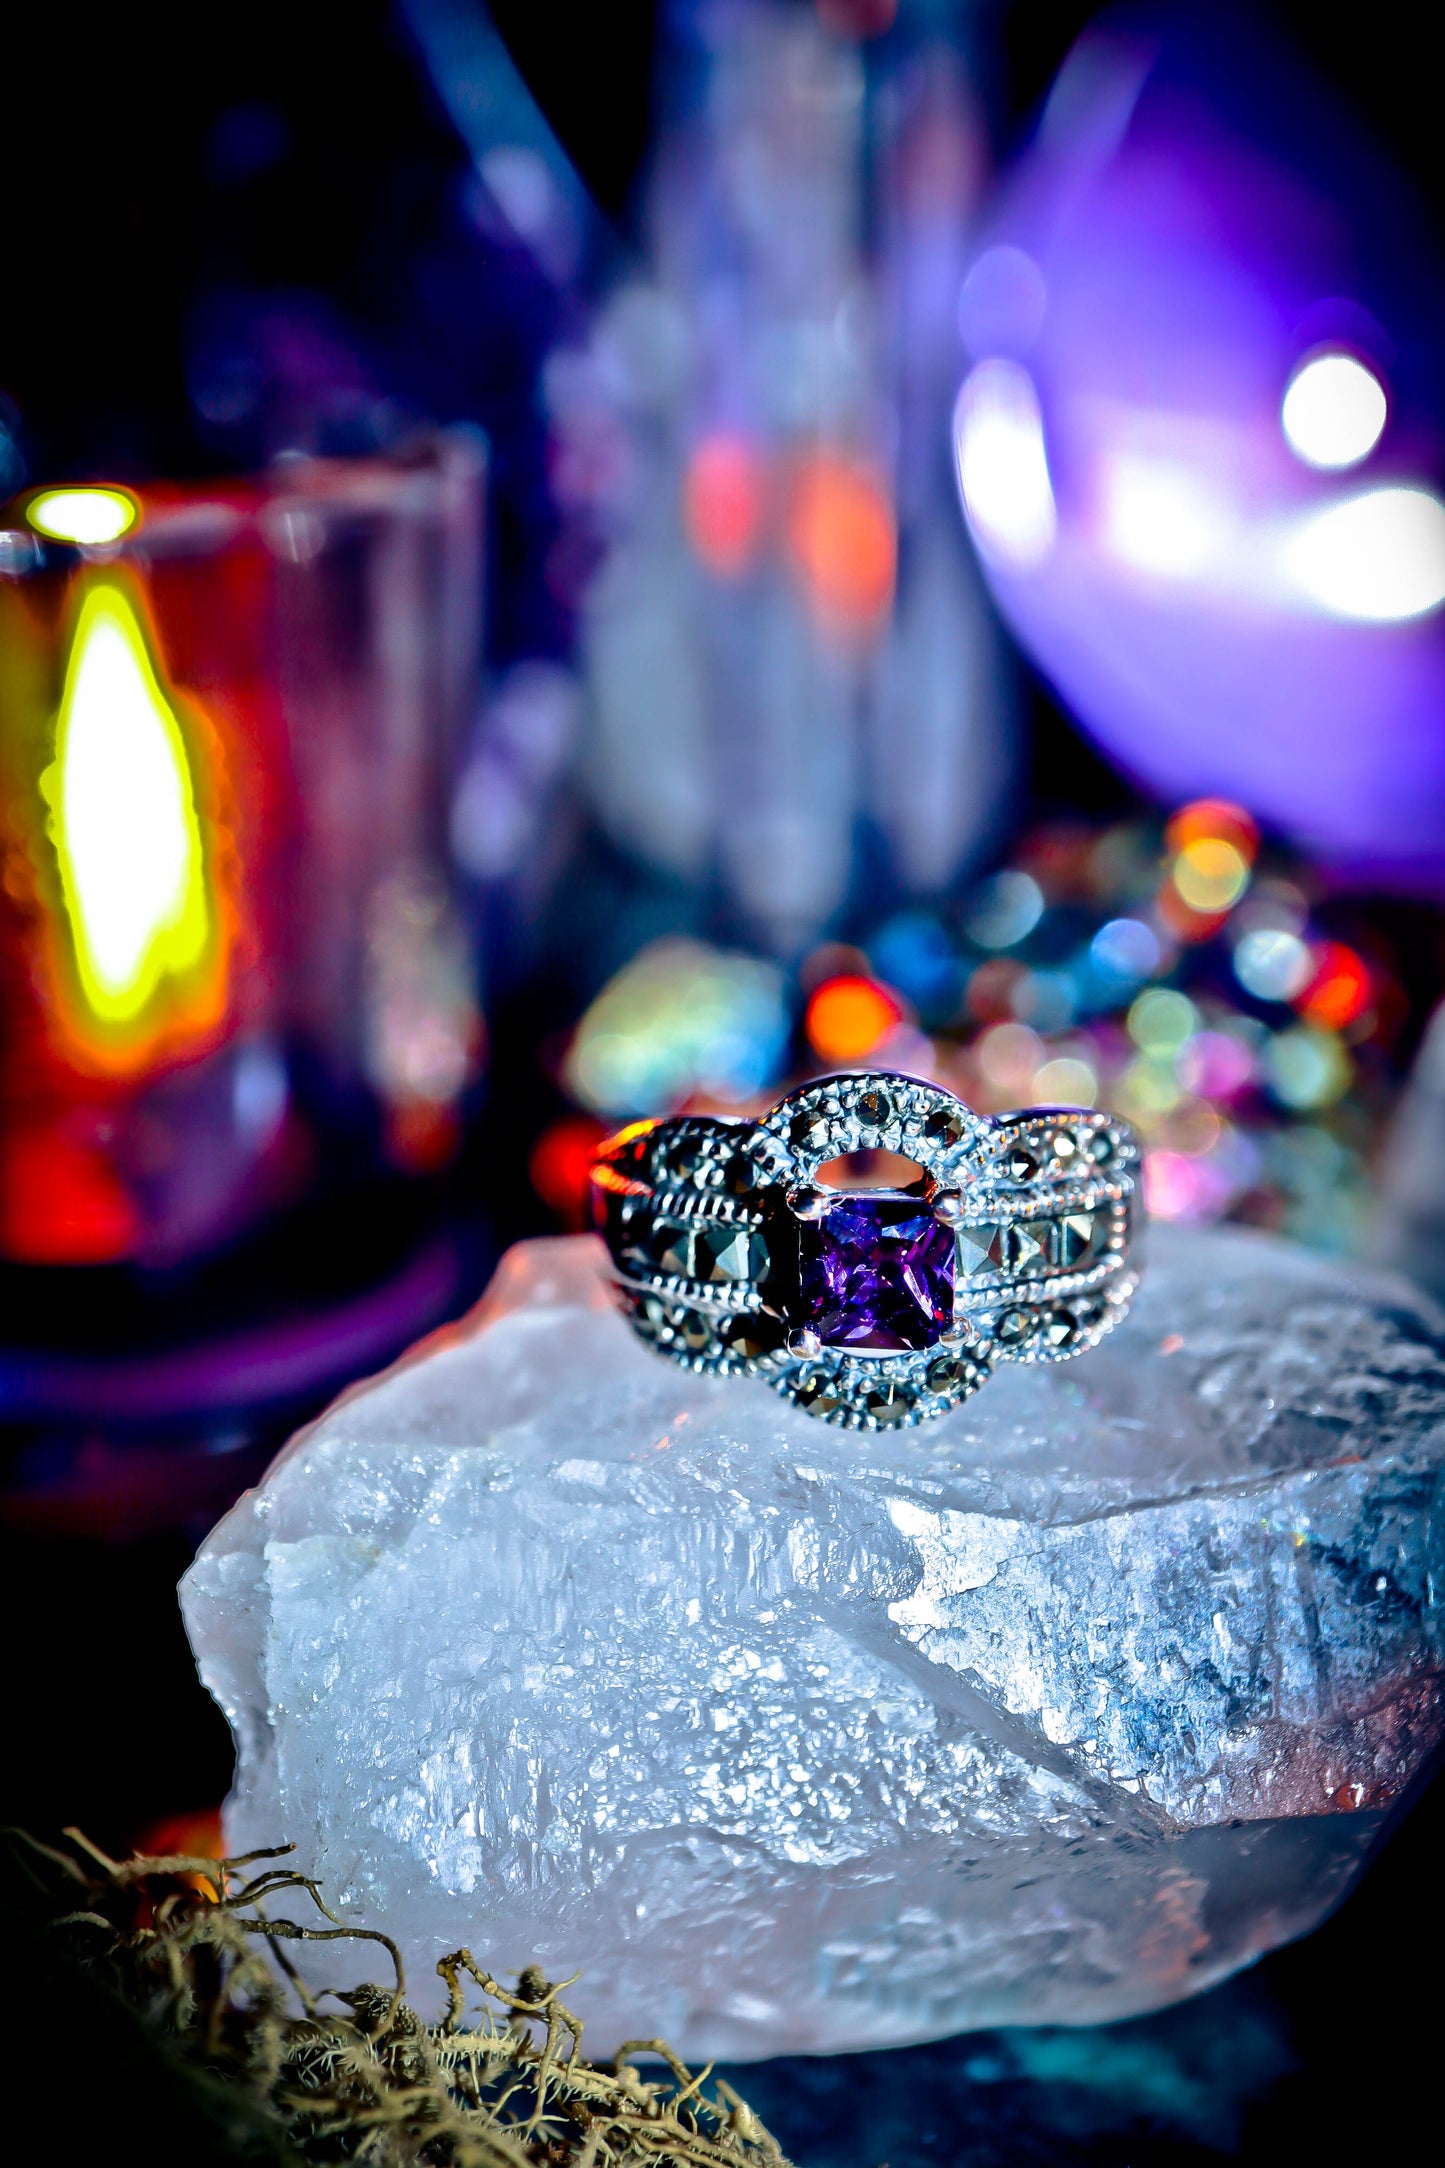 **SACRED** GODDESS HERA Ultimate Beauty & Prosperity Ring of Eloria! GLOWING! True Wisdom, Youth, Success! ~ Witch Magic Spell ~ Gain the Perfect Figure! REAL Beauty! 925 Silver!